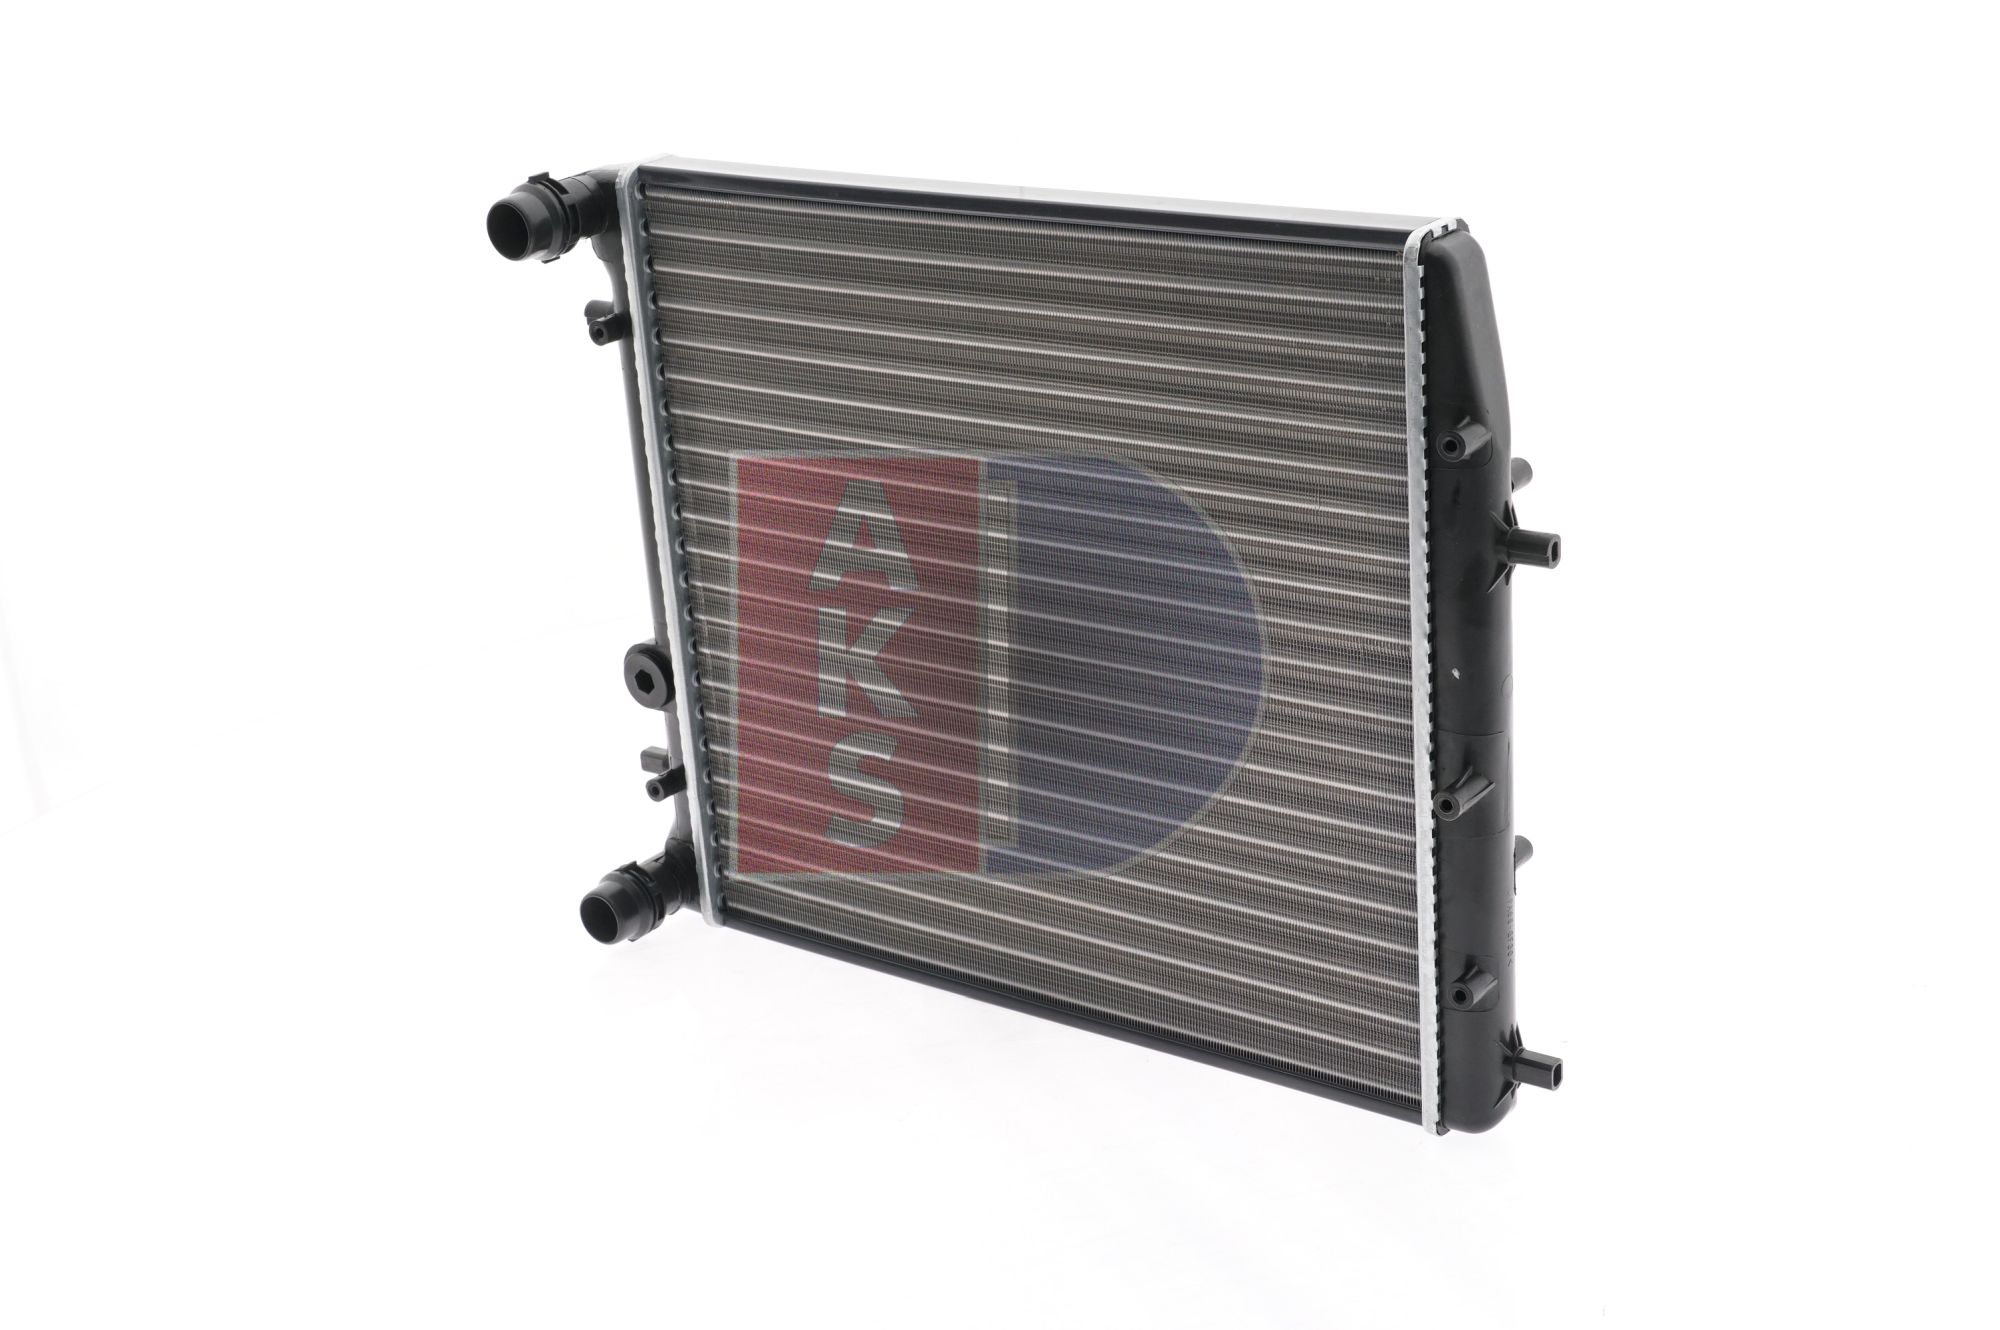 AKS DASIS 040008N Engine radiator 430 x 415 x 23 mm, Mechanically jointed cooling fins